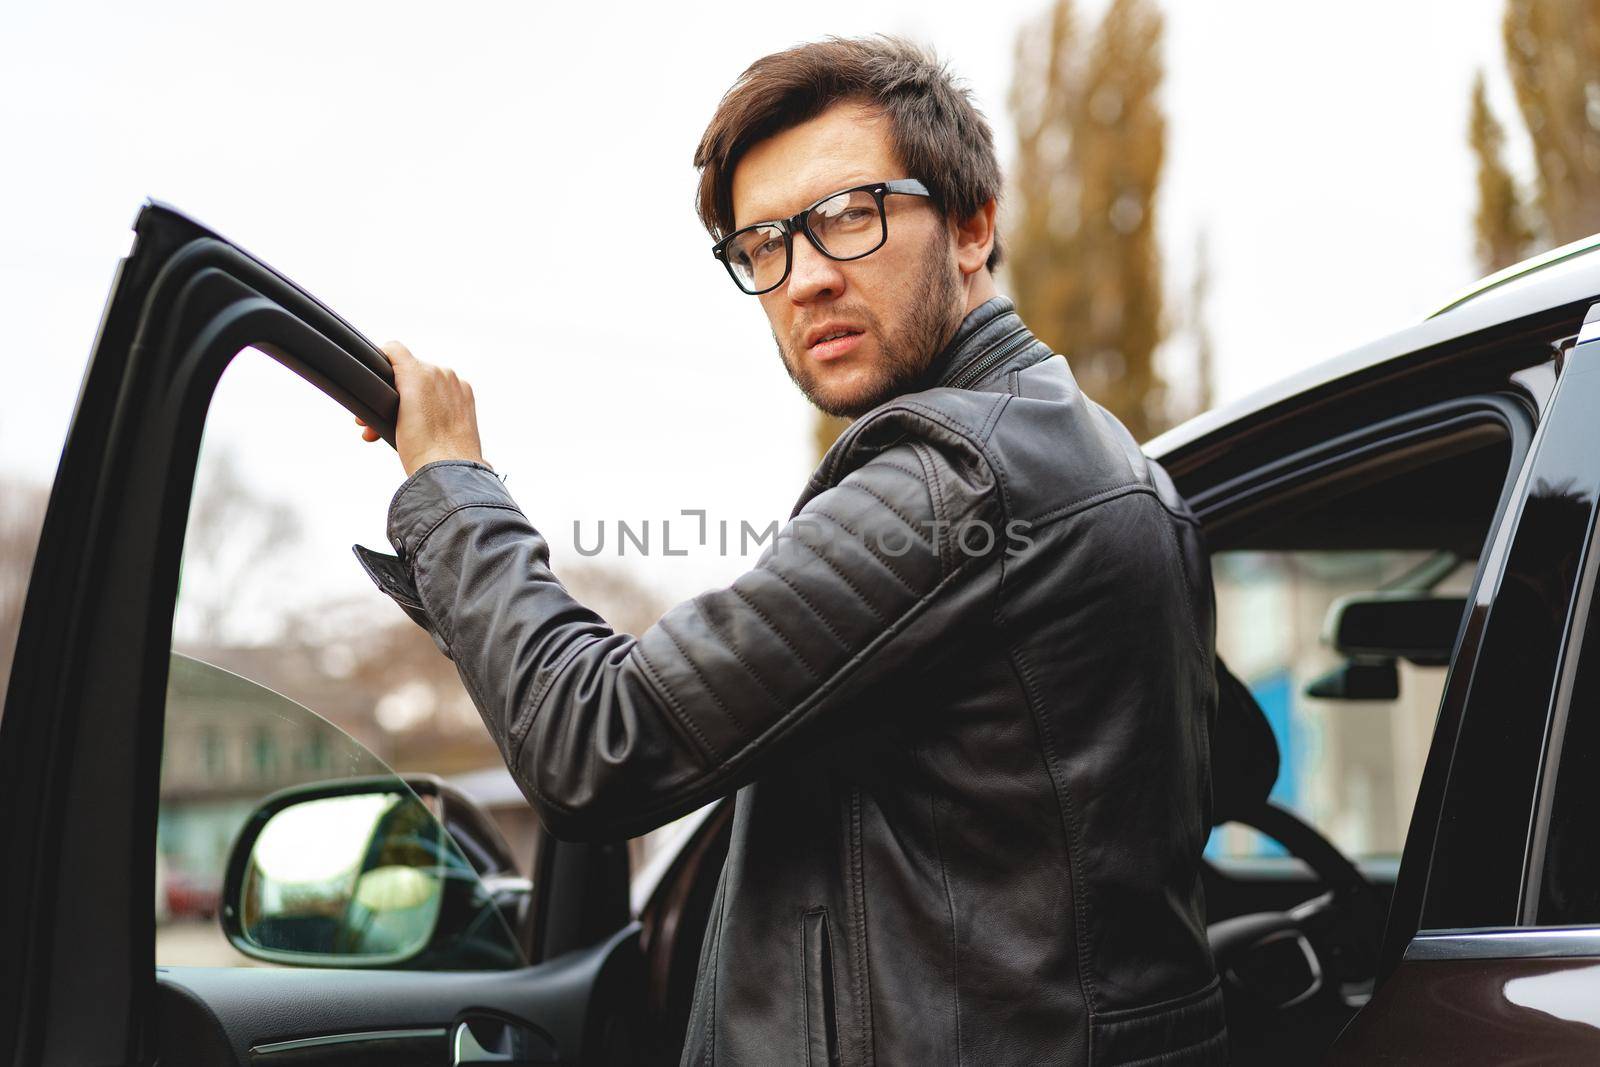 Stylish man in glasses sits in a car, close up portrait